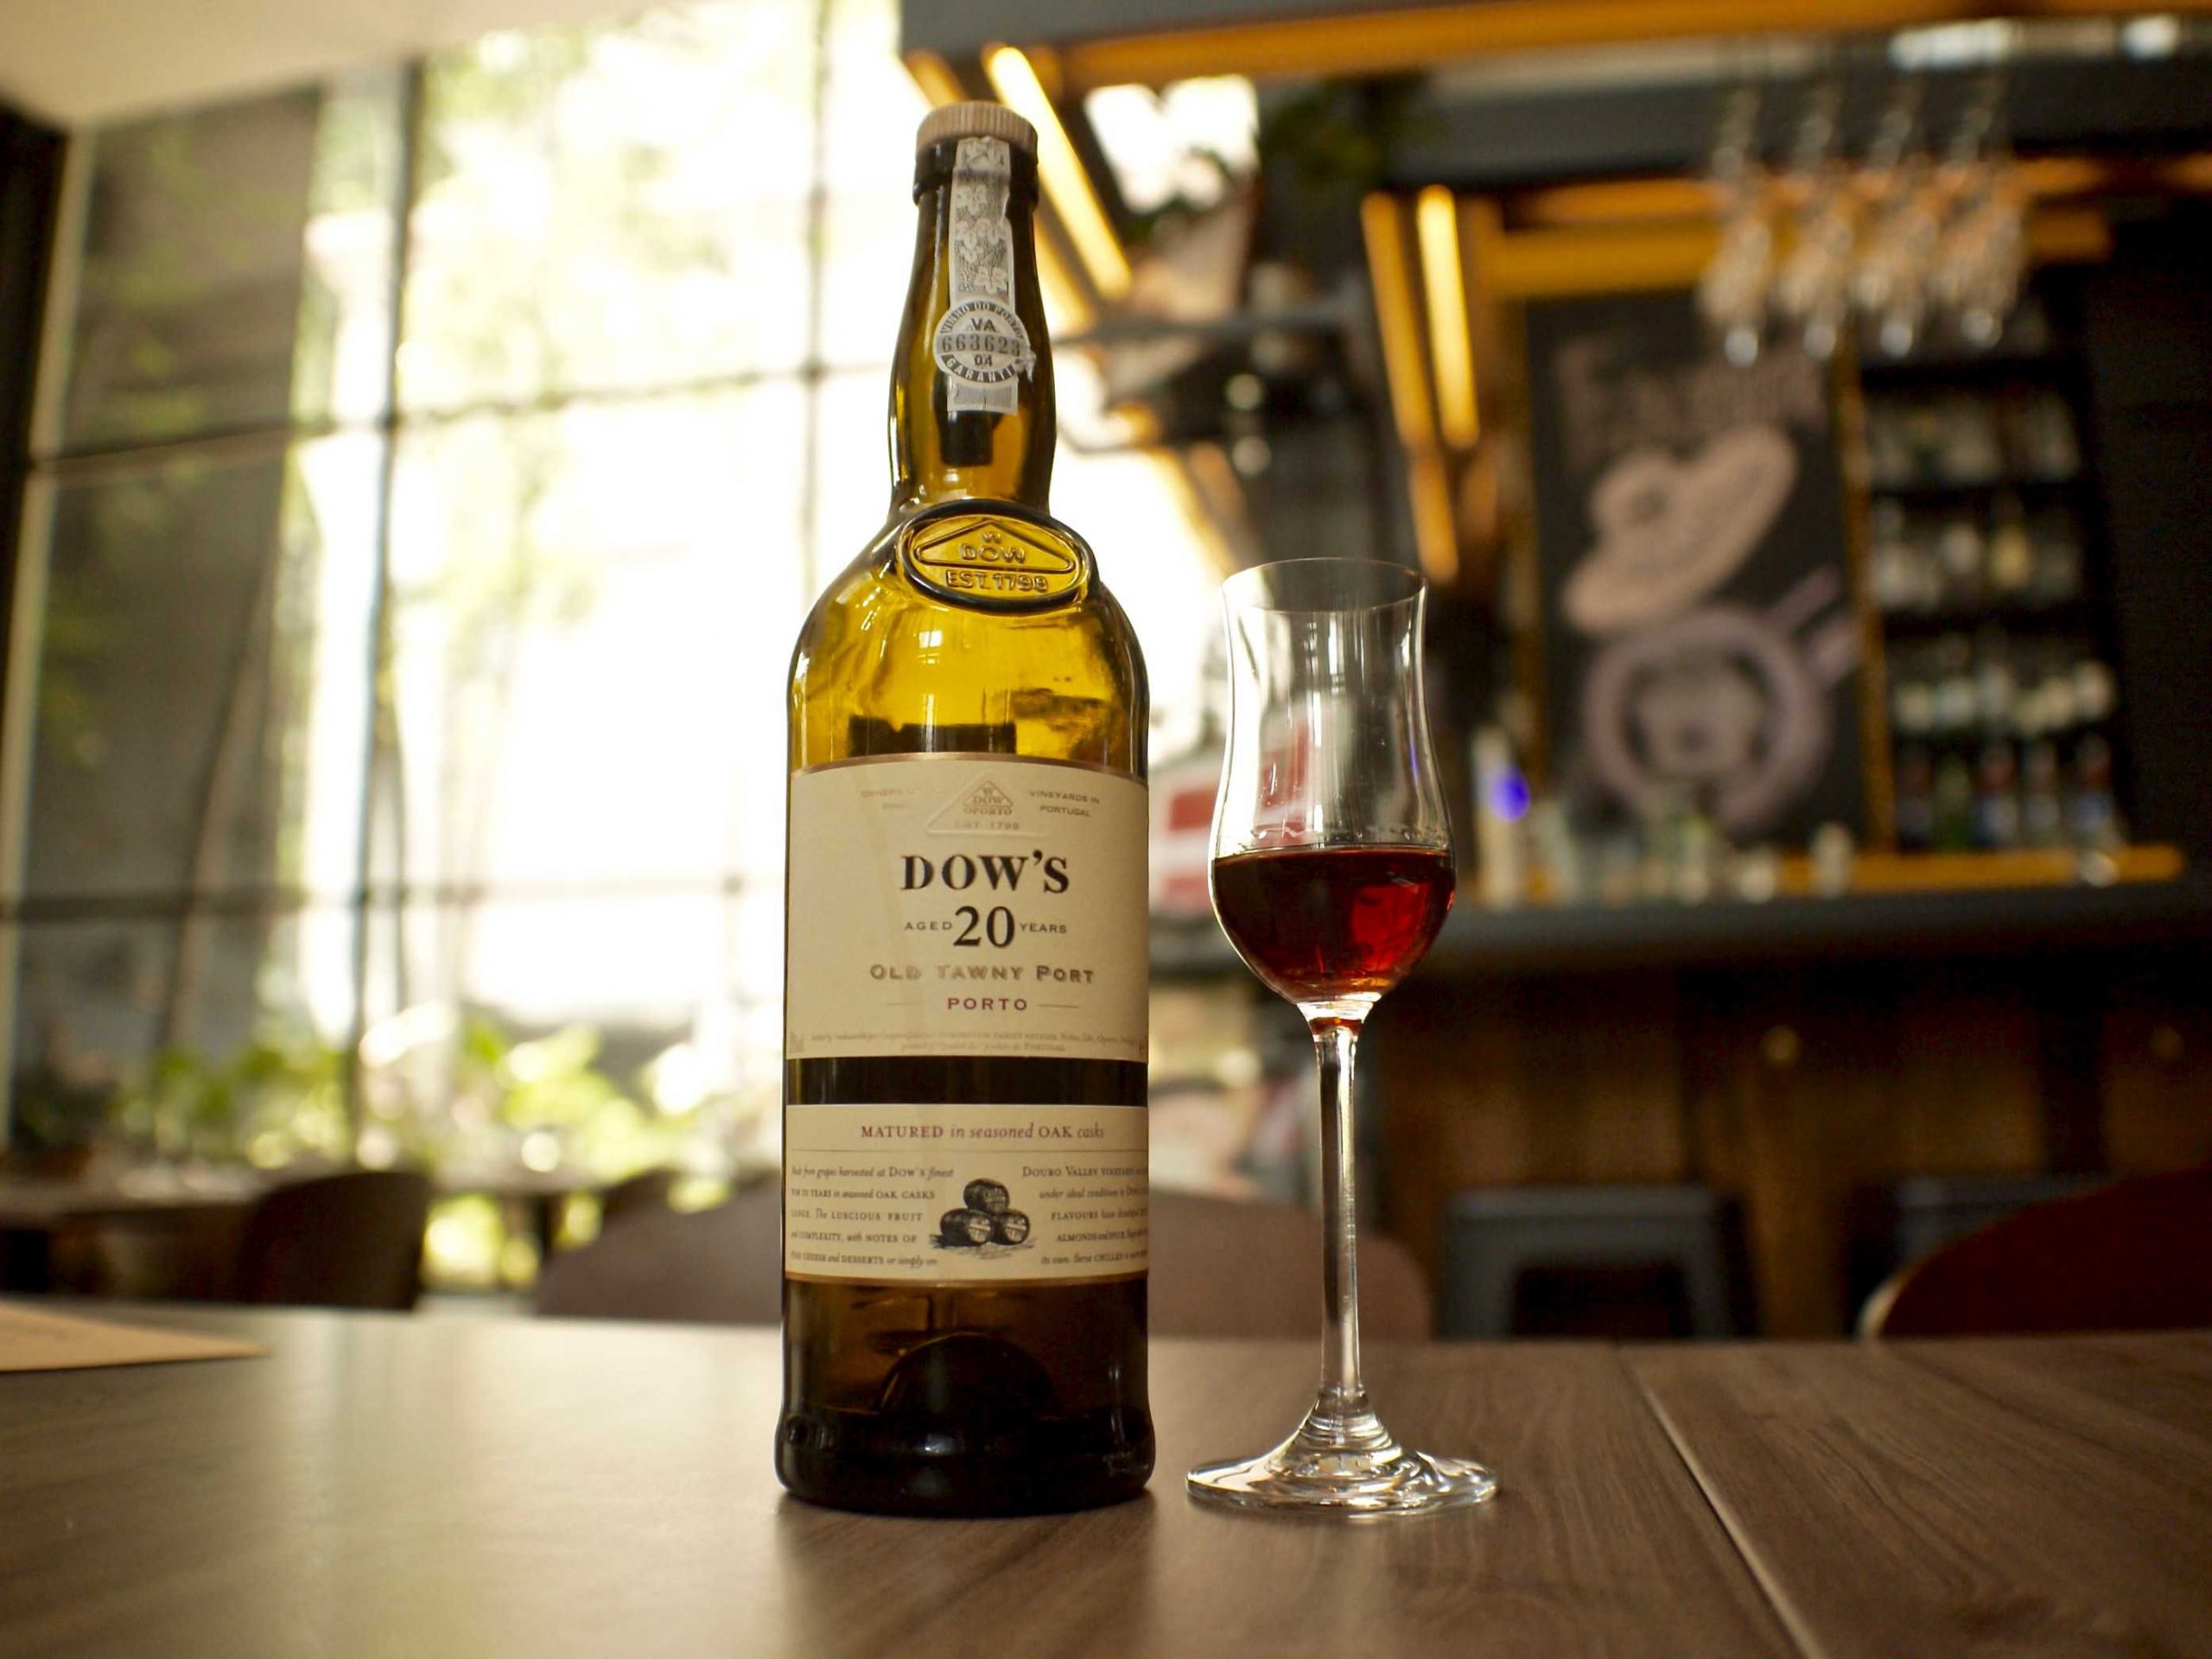 20 years Fine Tawny, Down’s Douro NV | Skillet at 163 | Food For Thought